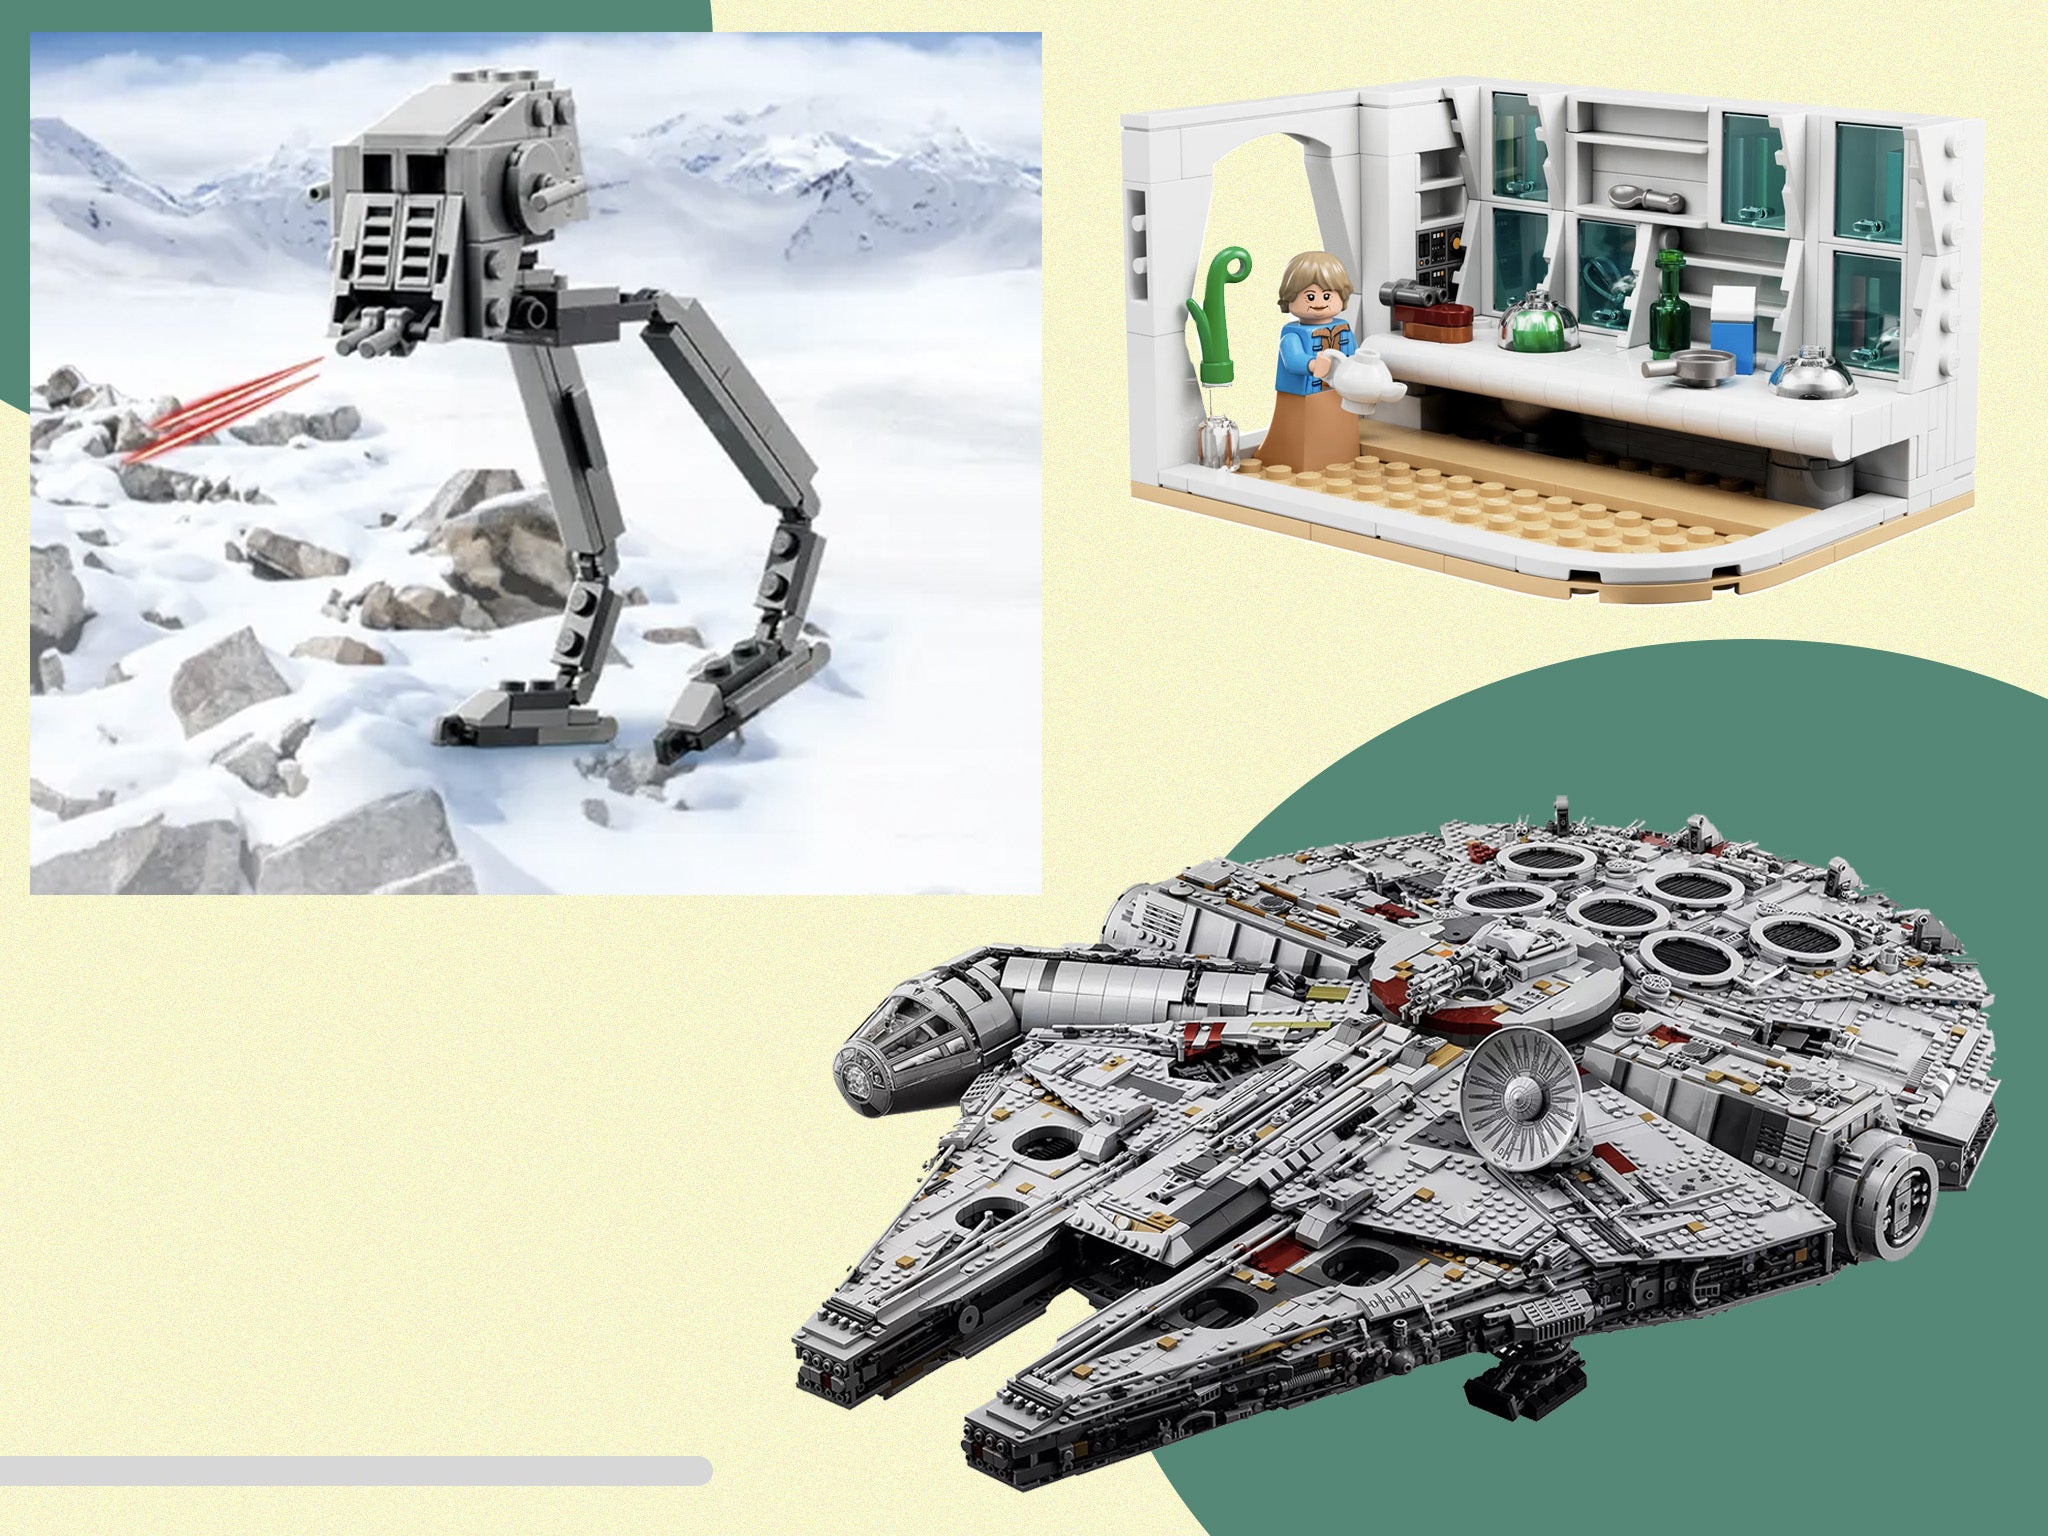 There are savings to be made on some of the most popular Lego Star Wars sets